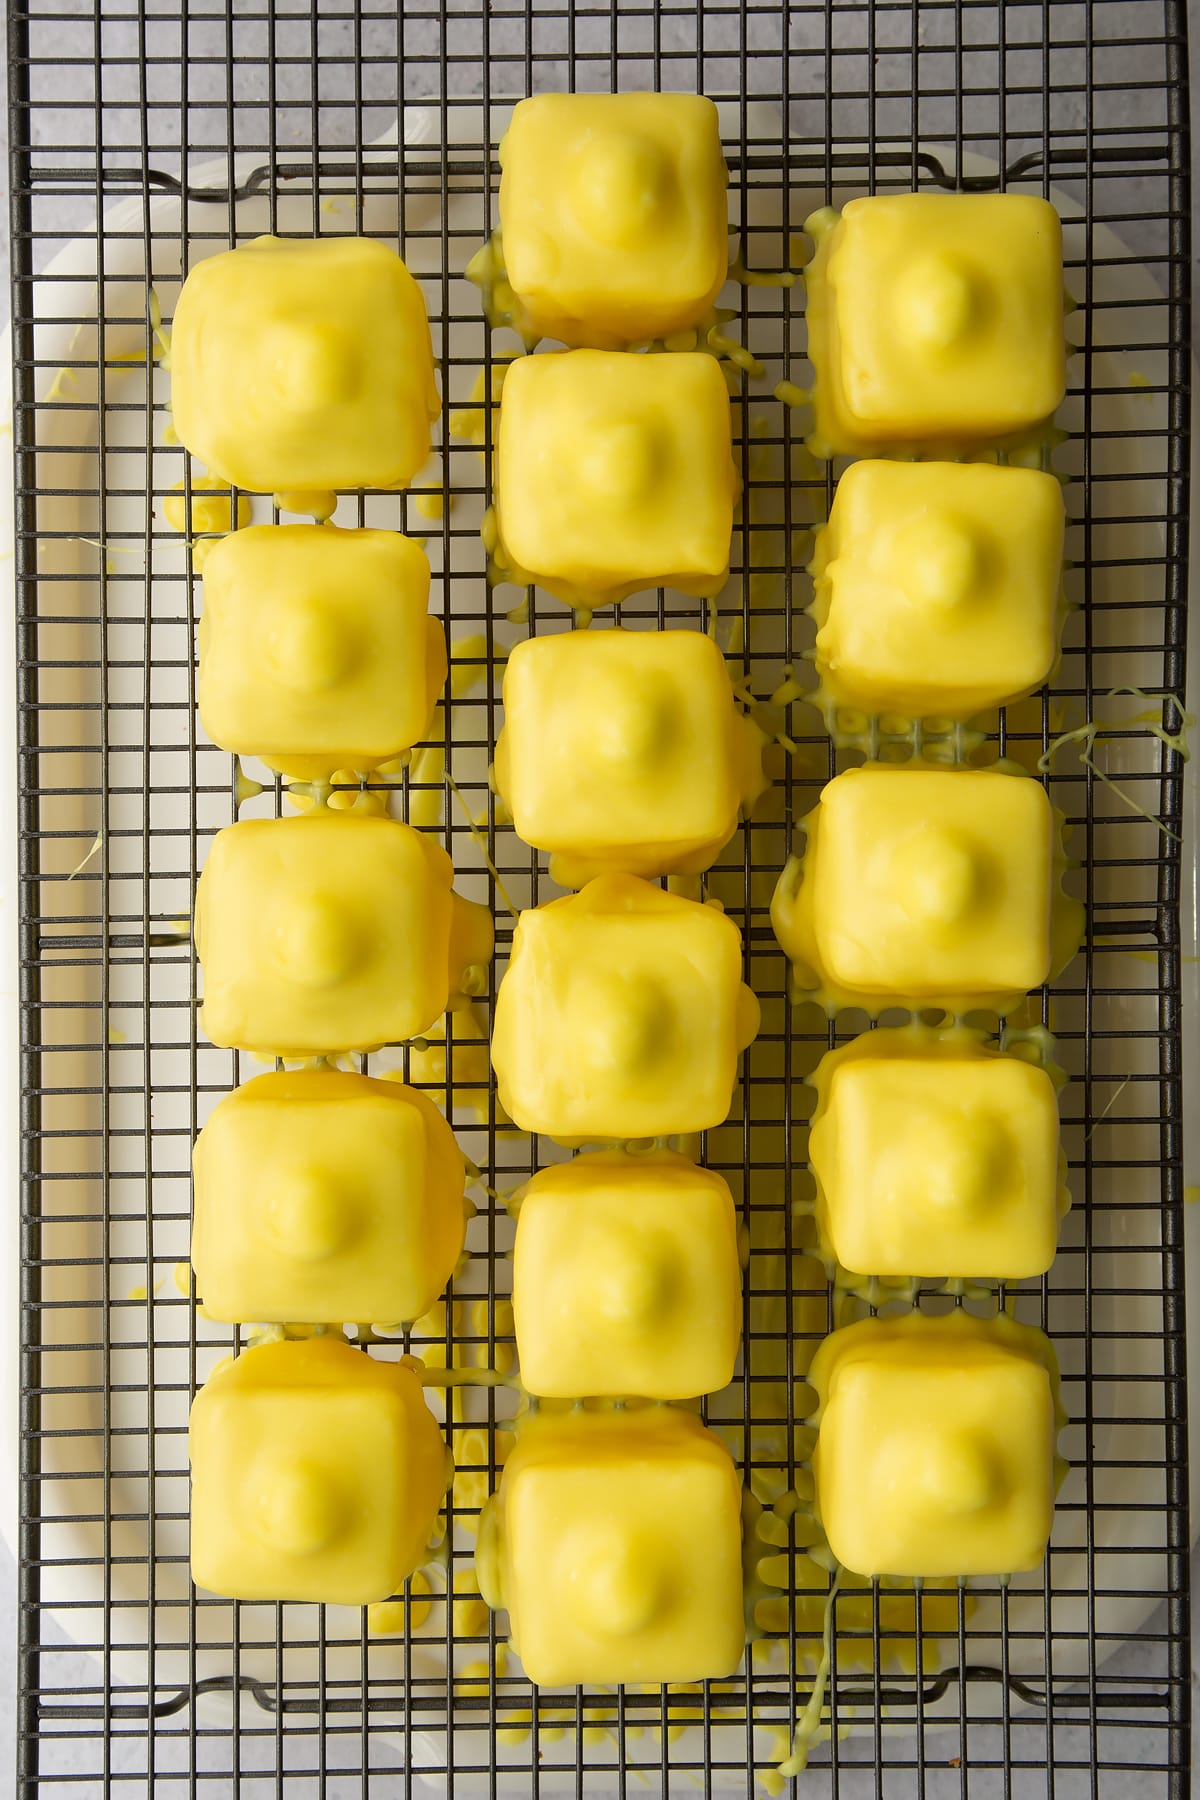 Drizzling the icing over the top of the lemon fondant fancies on a wire rack.